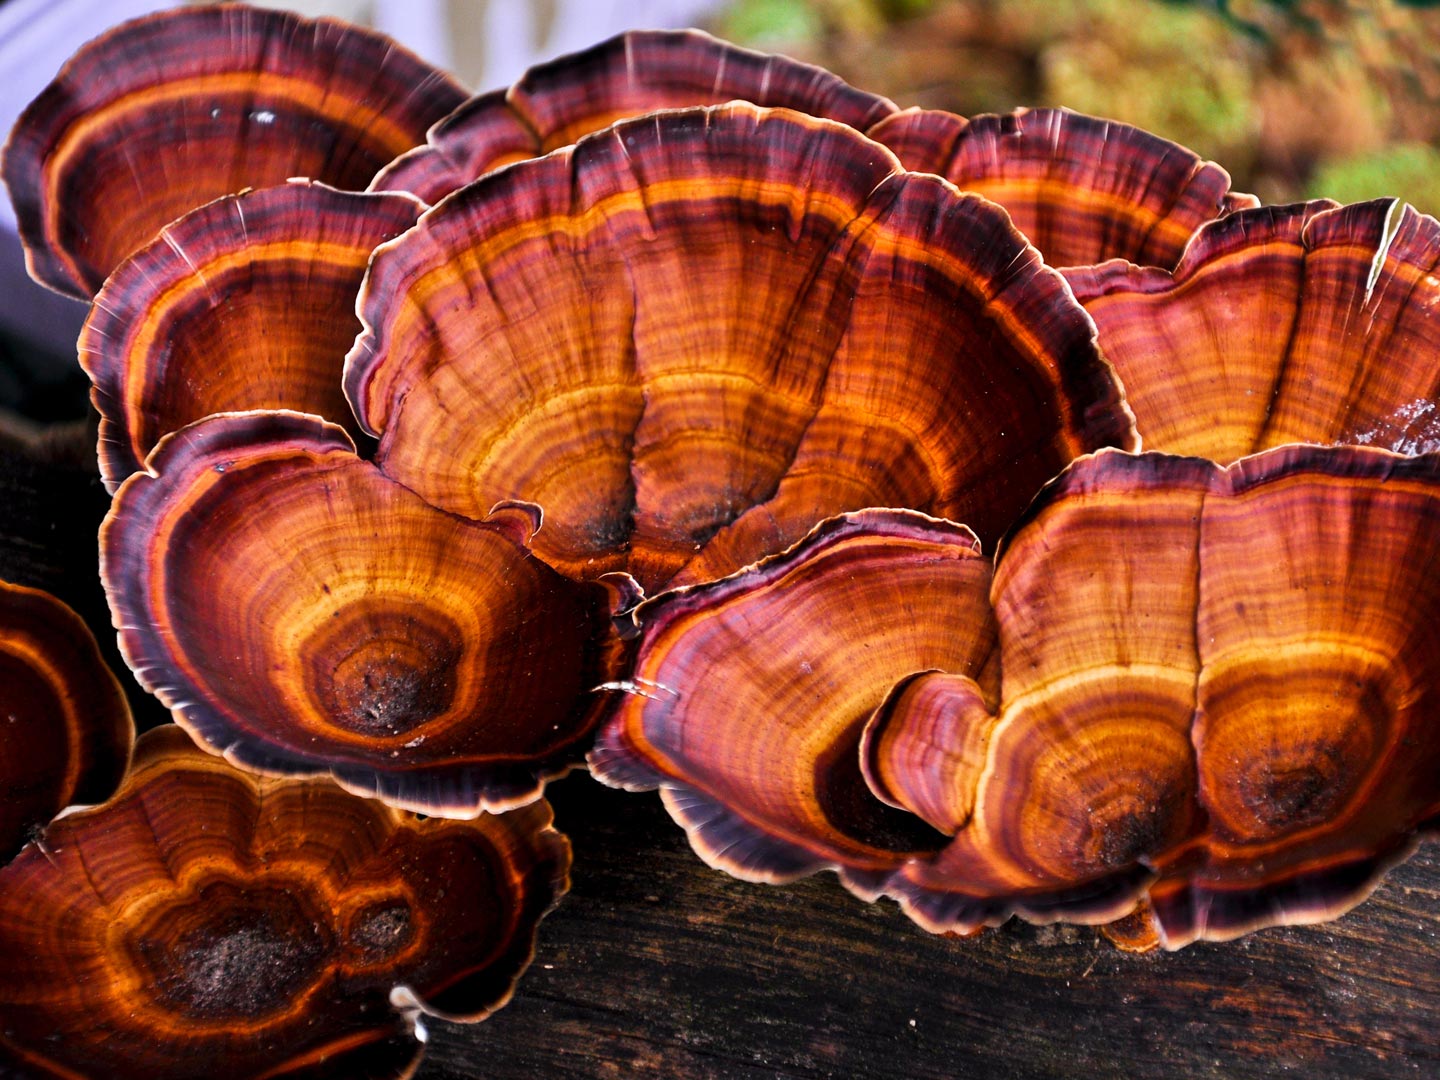 Comprehensive Guide on the Benefits of Reishi Functional Mushrooms